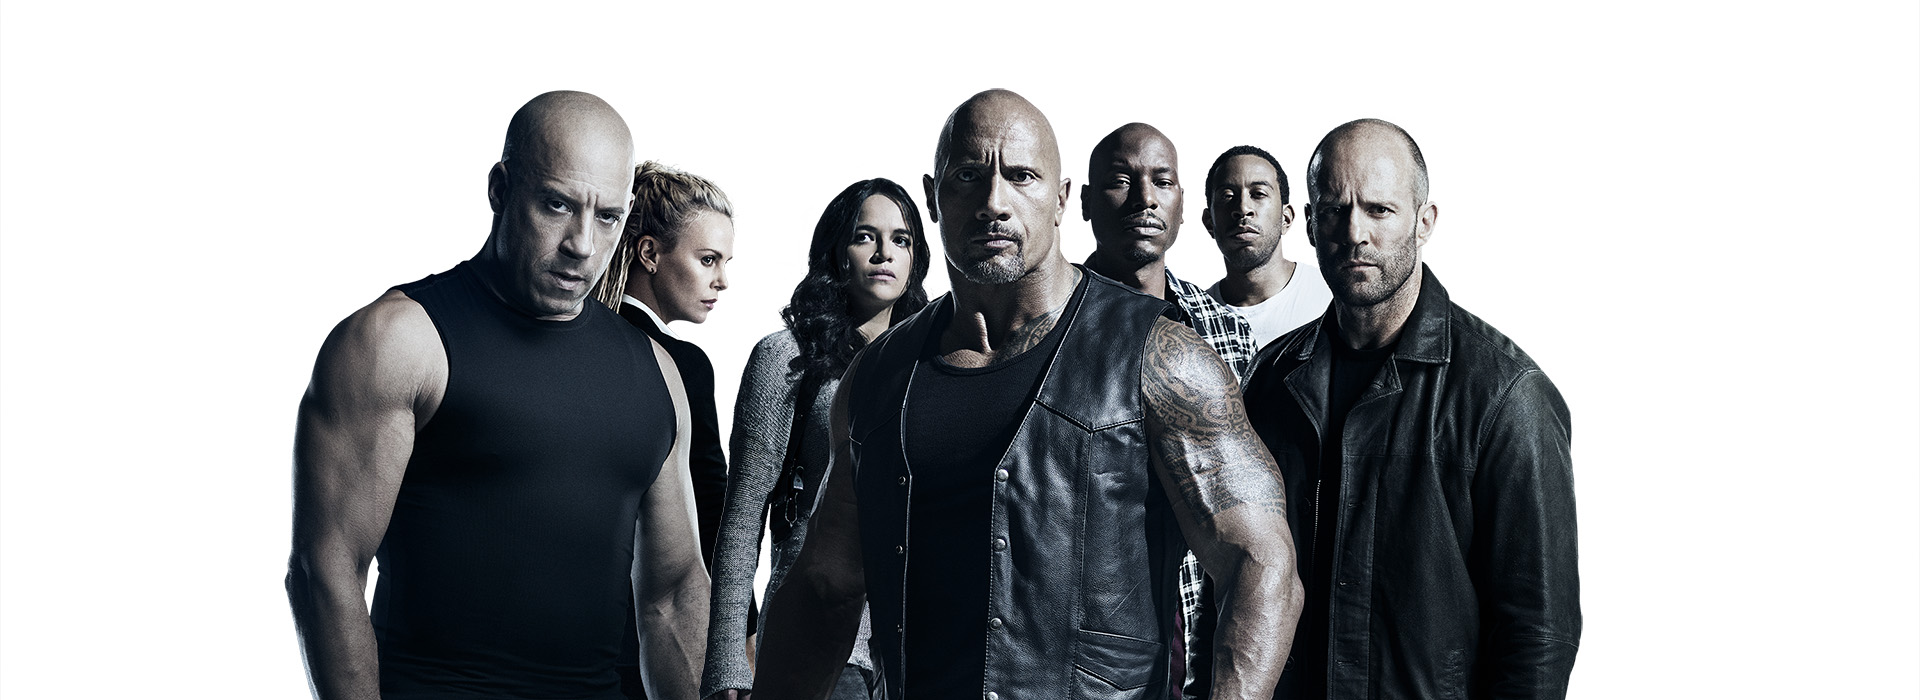 Movie poster The Fate of the Furious